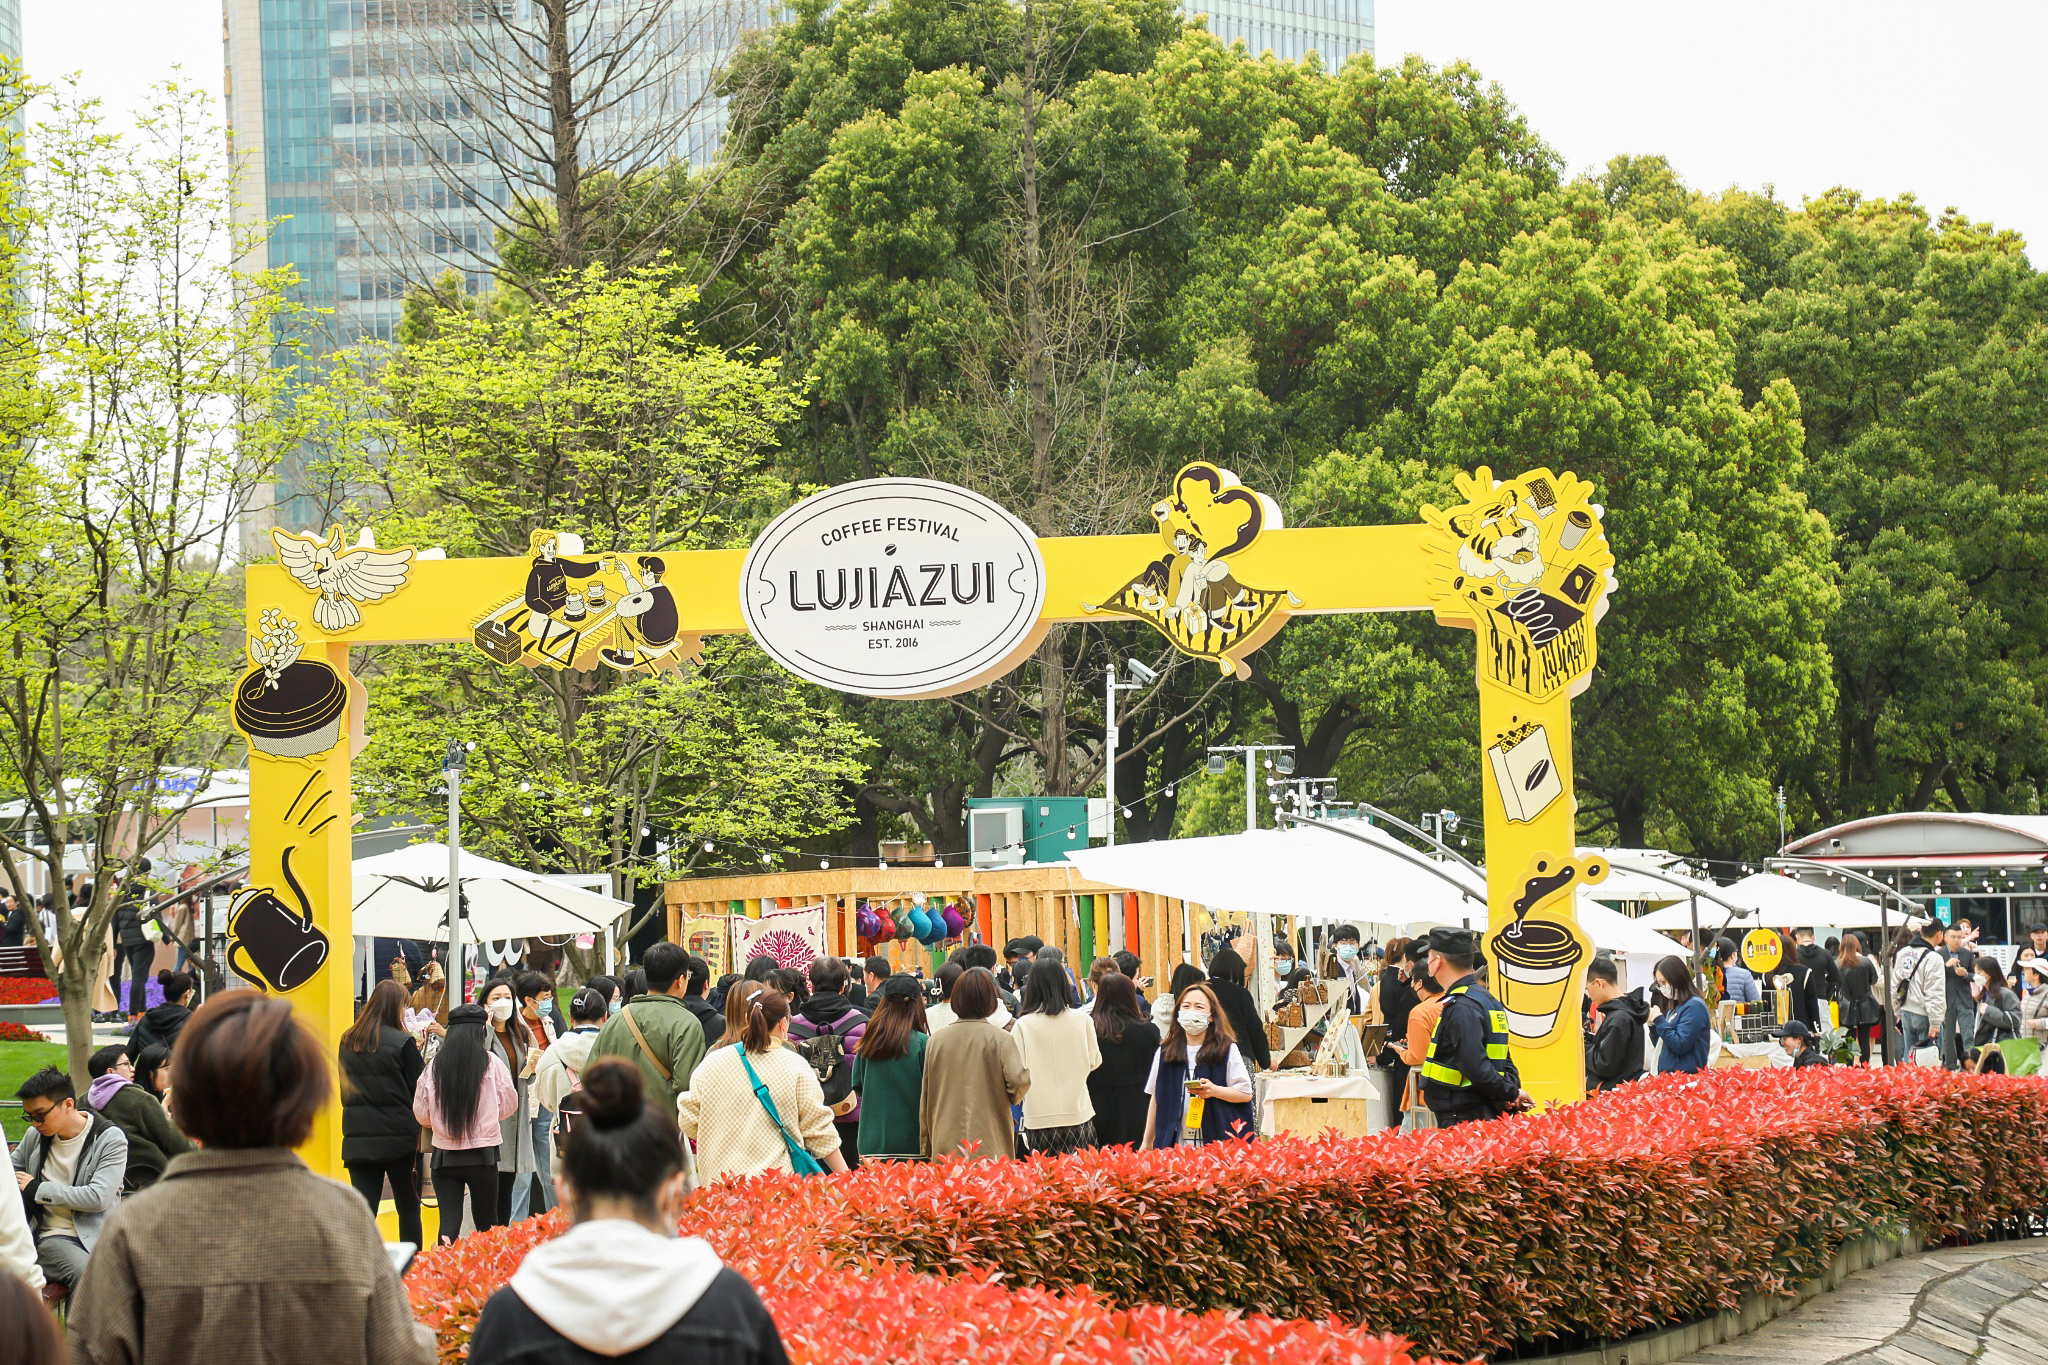 The open-air coffee fair attracts many city dwellers to come and have a taste. /CMG